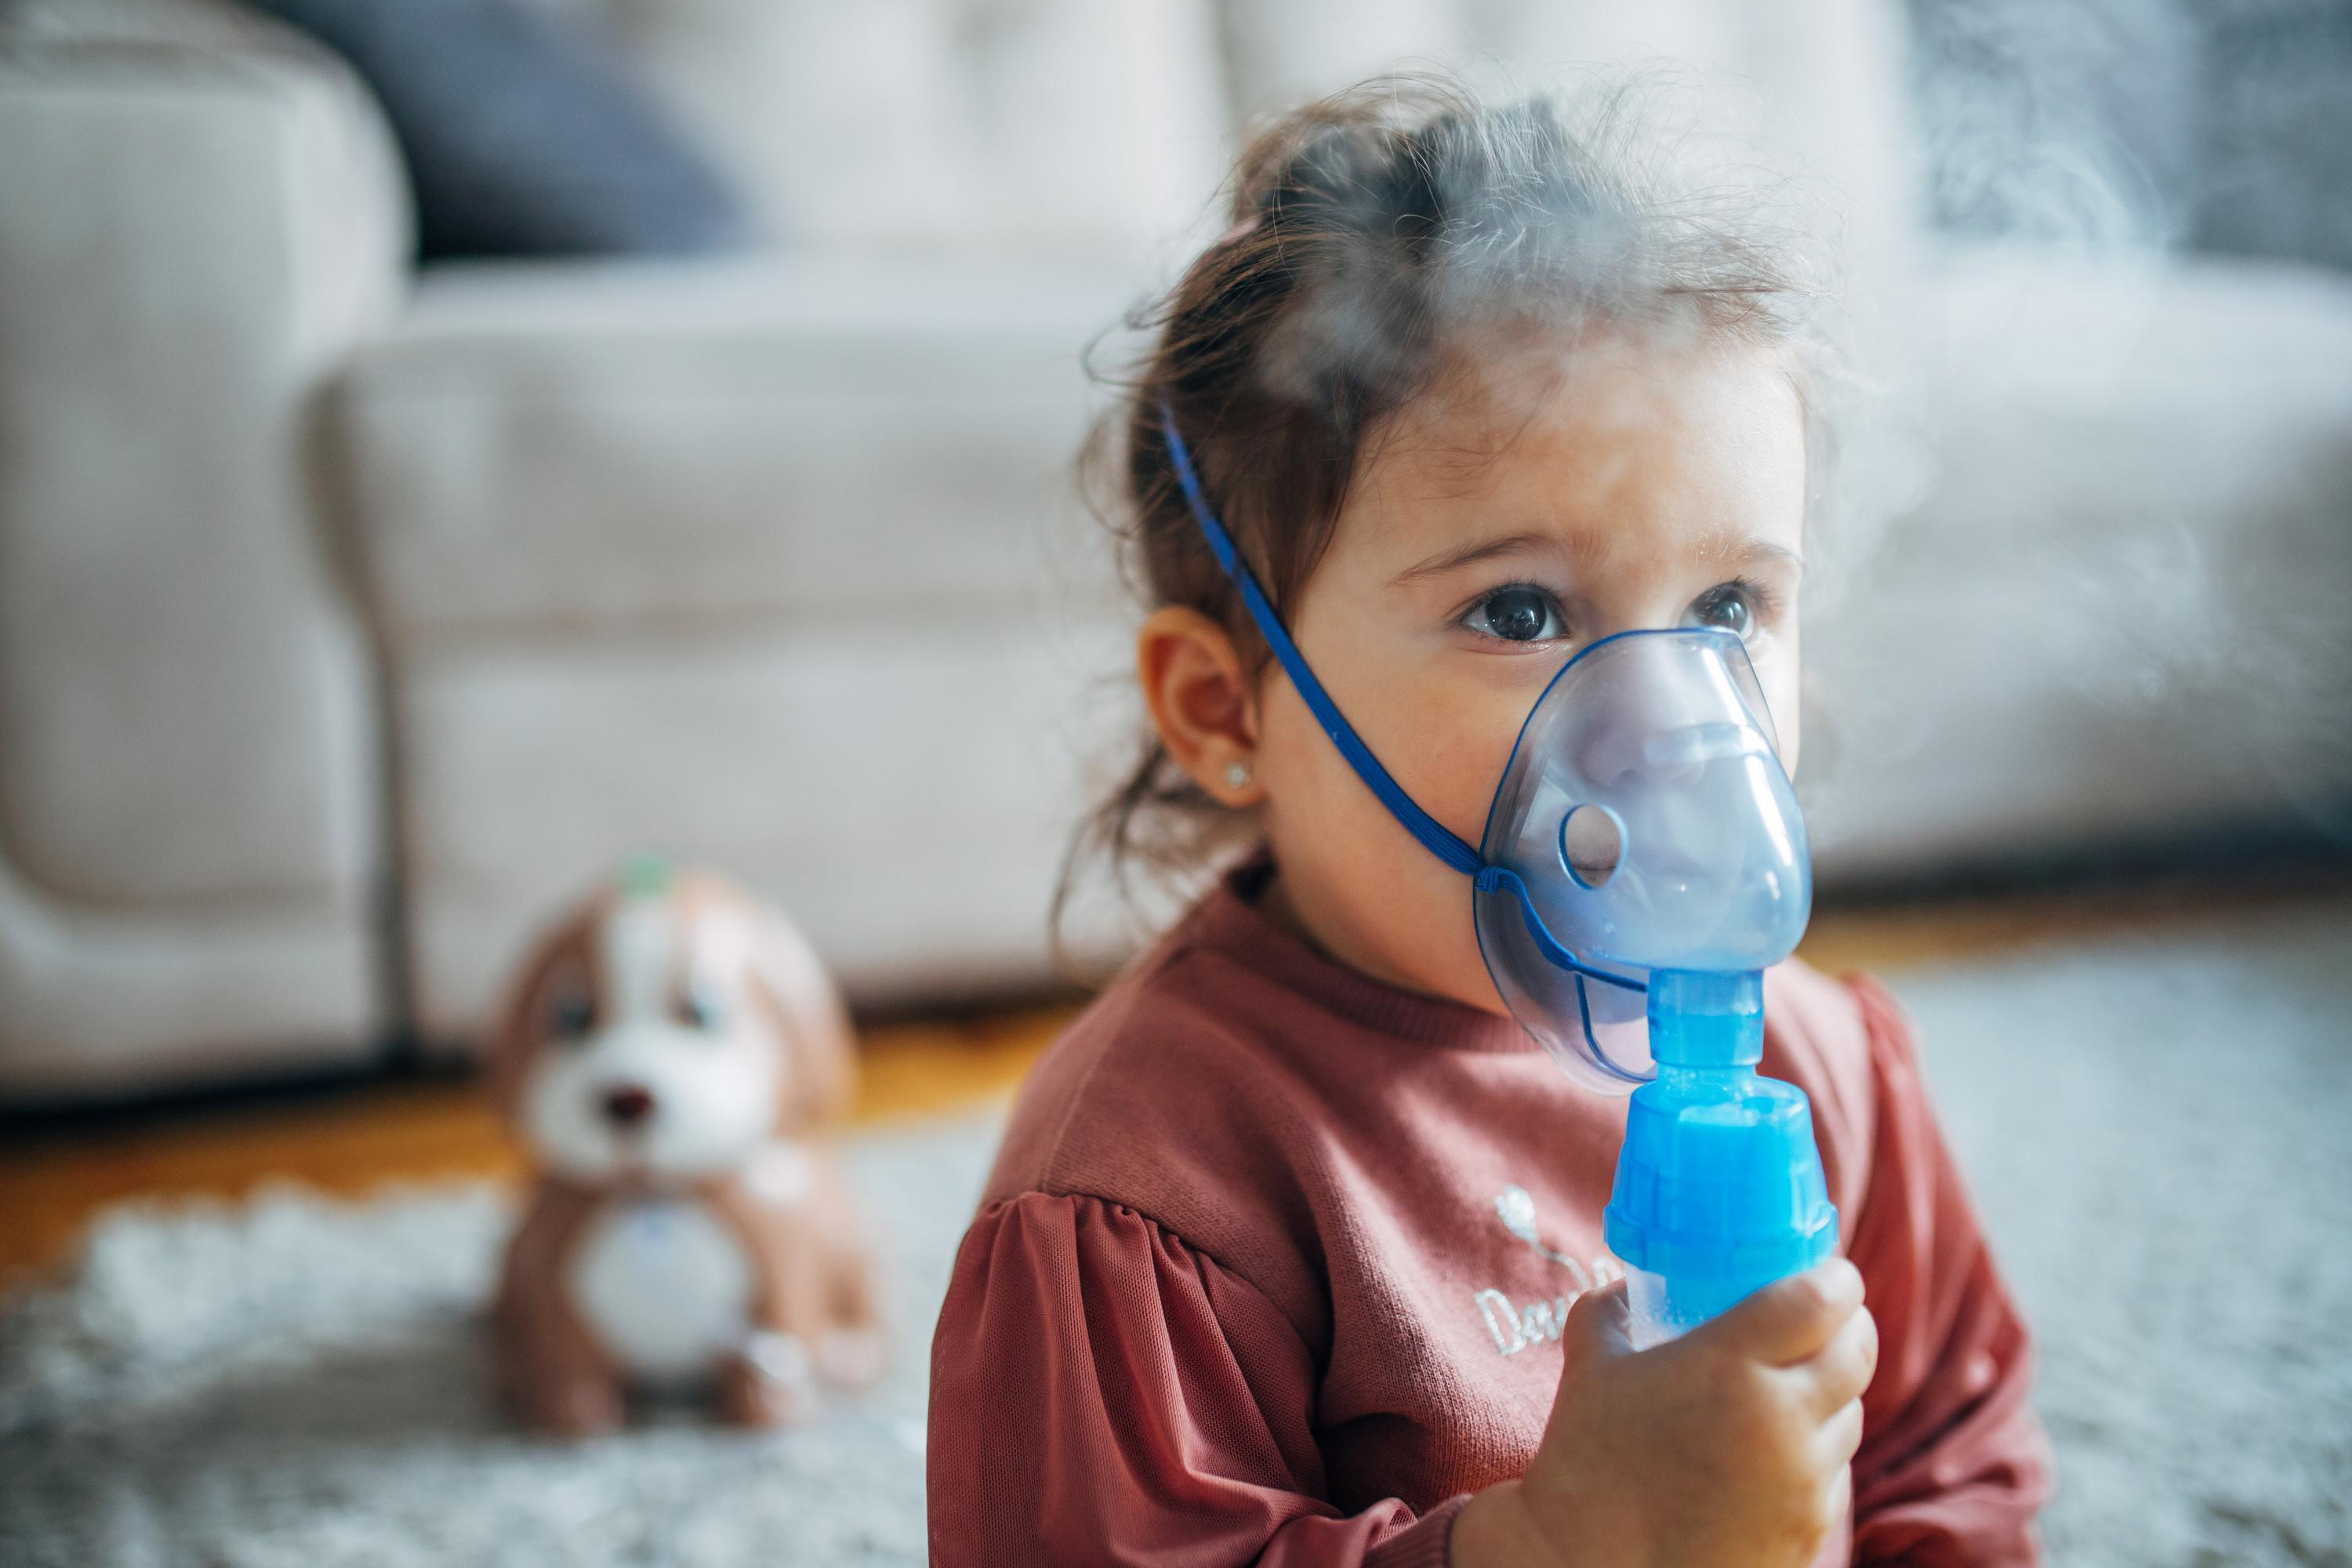 Cystic fibrosis: how a treatment revolutionized the lives of patients